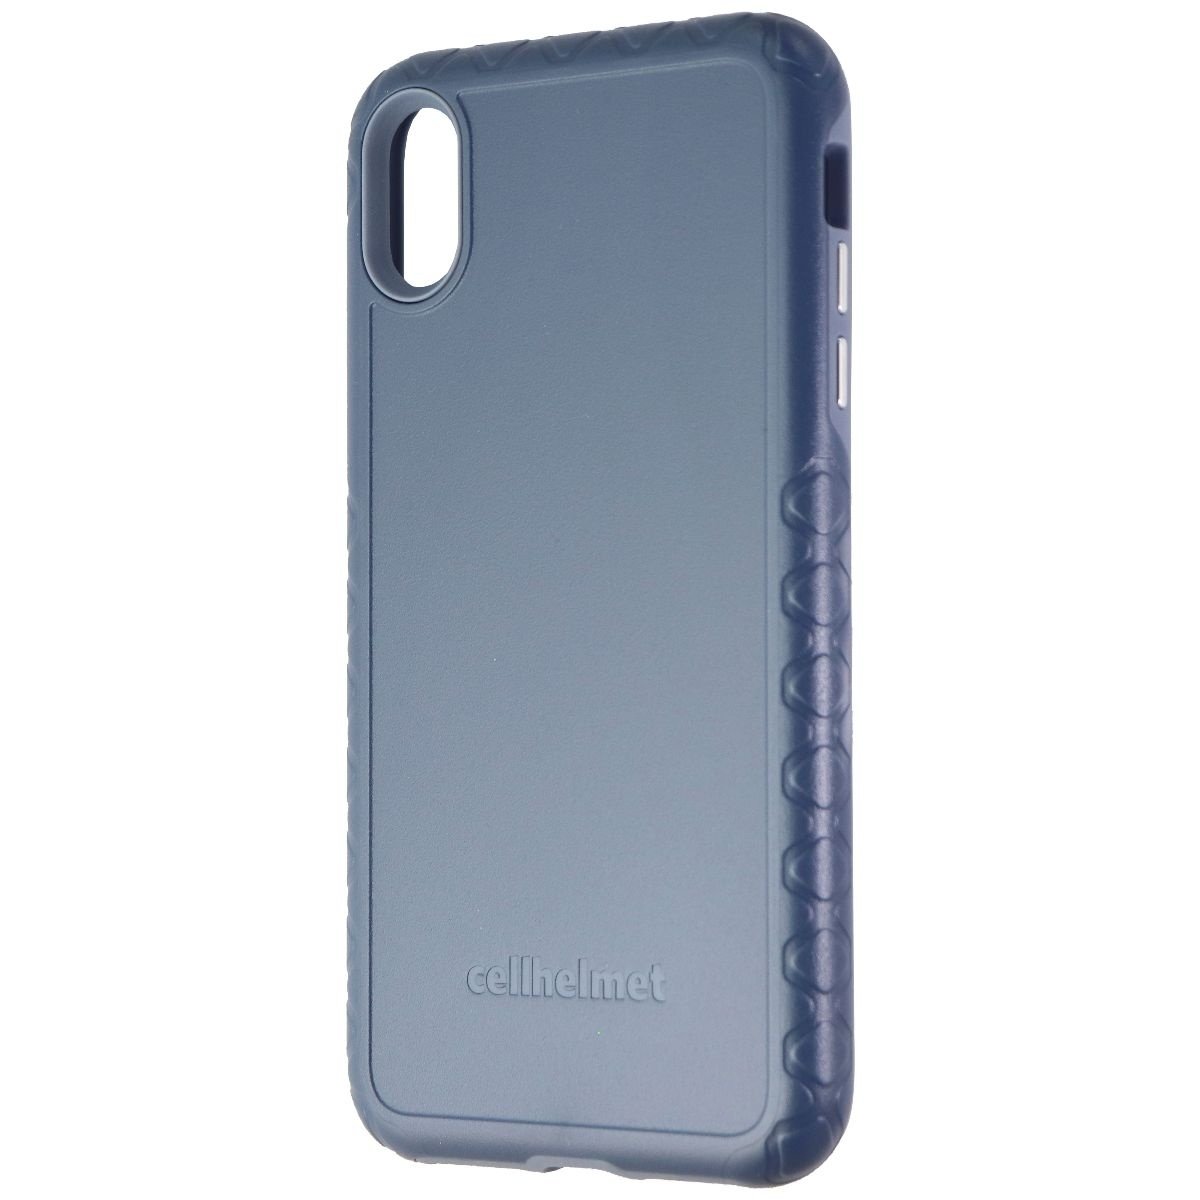 CellHelmet Fortitude Series Case For Apple IPhone XS Max - Slate Blue